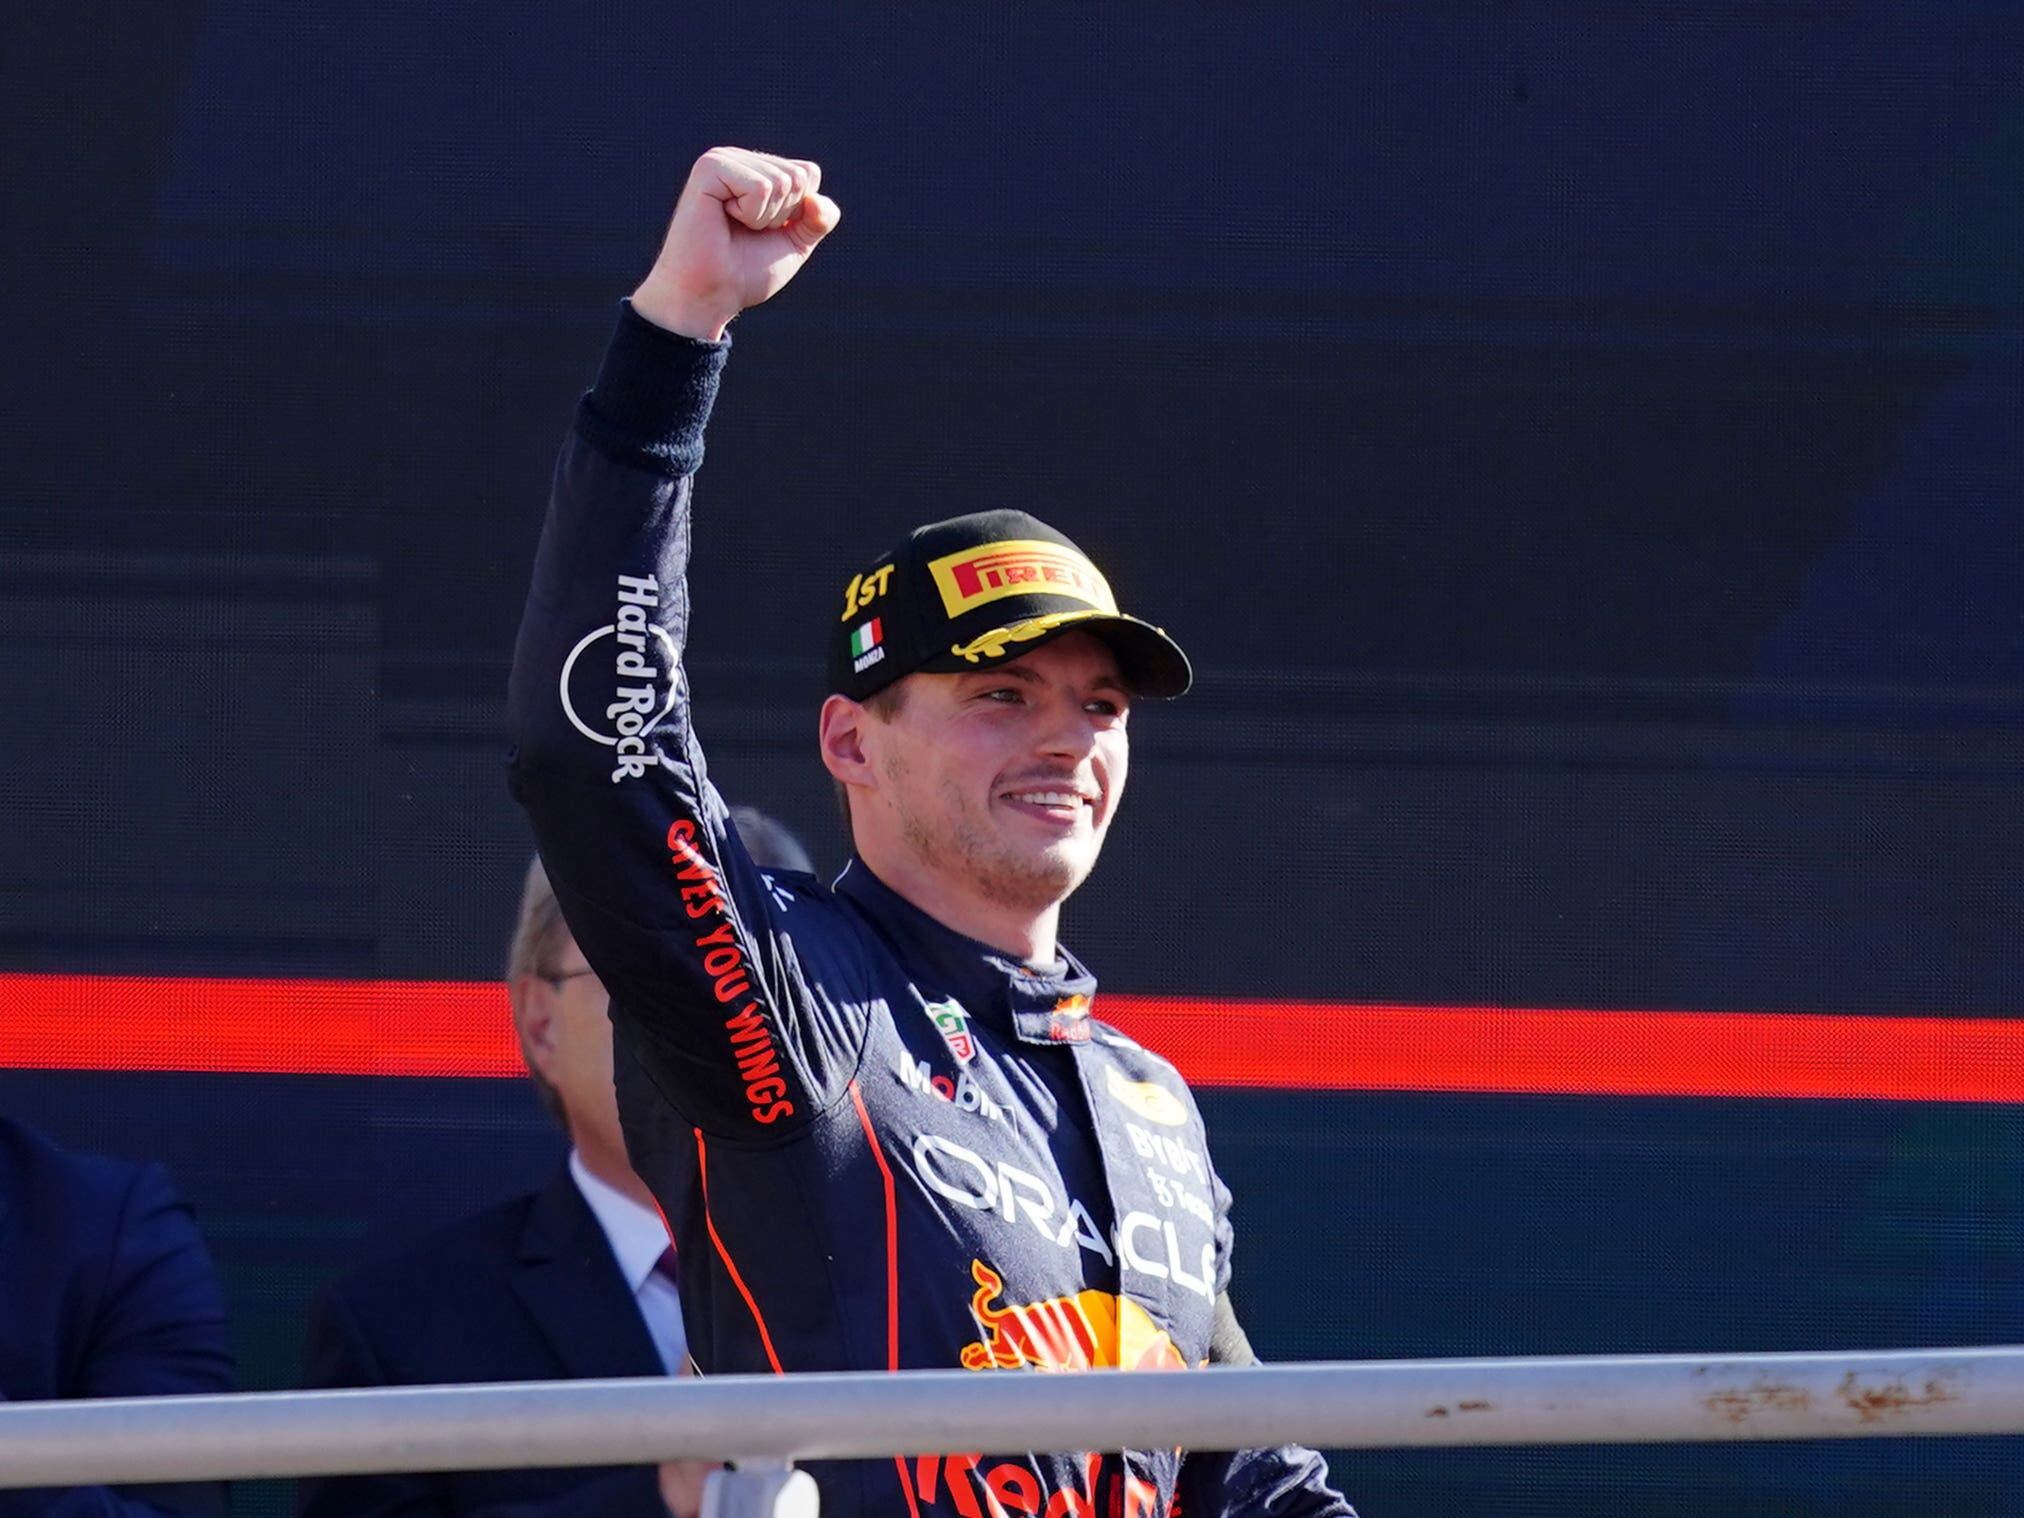 FIA defends decision not to issue red flag after fans boo Max Verstappen win